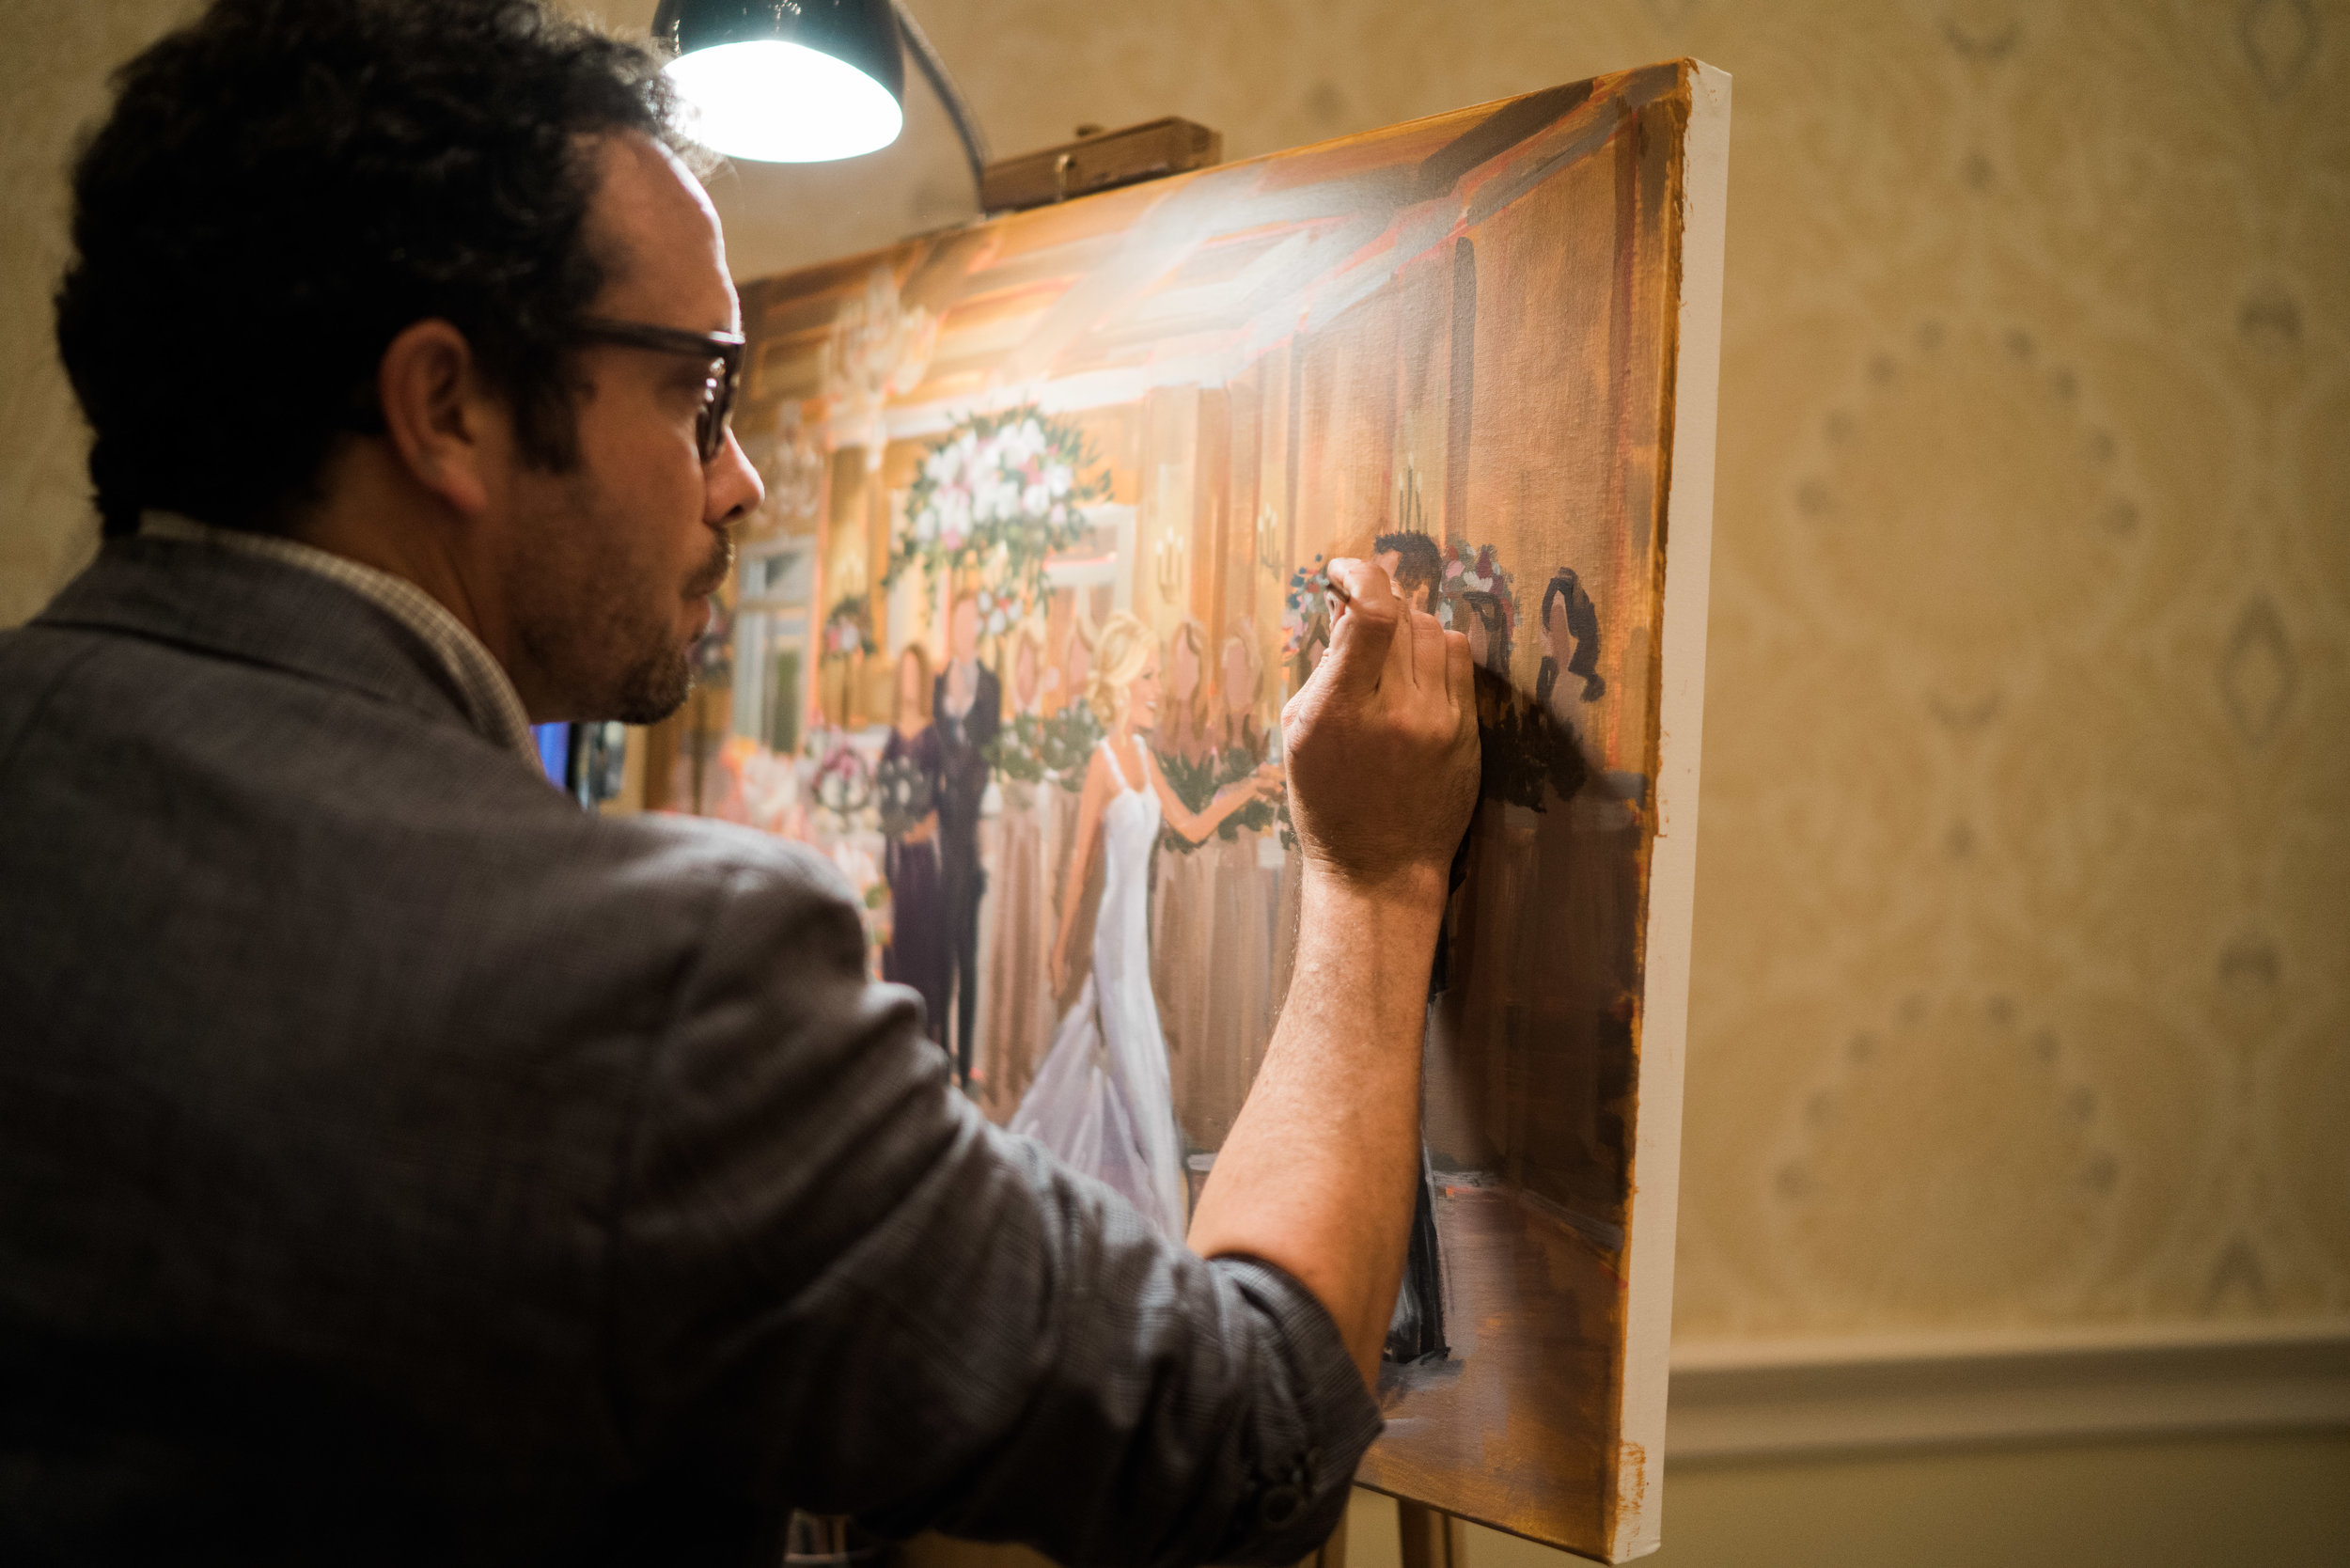 Live Wedding Painter, Ben Keys, captured Laura + Chris' first dance at their reception held at Cape Fear Country Club in Wilmington, NC.